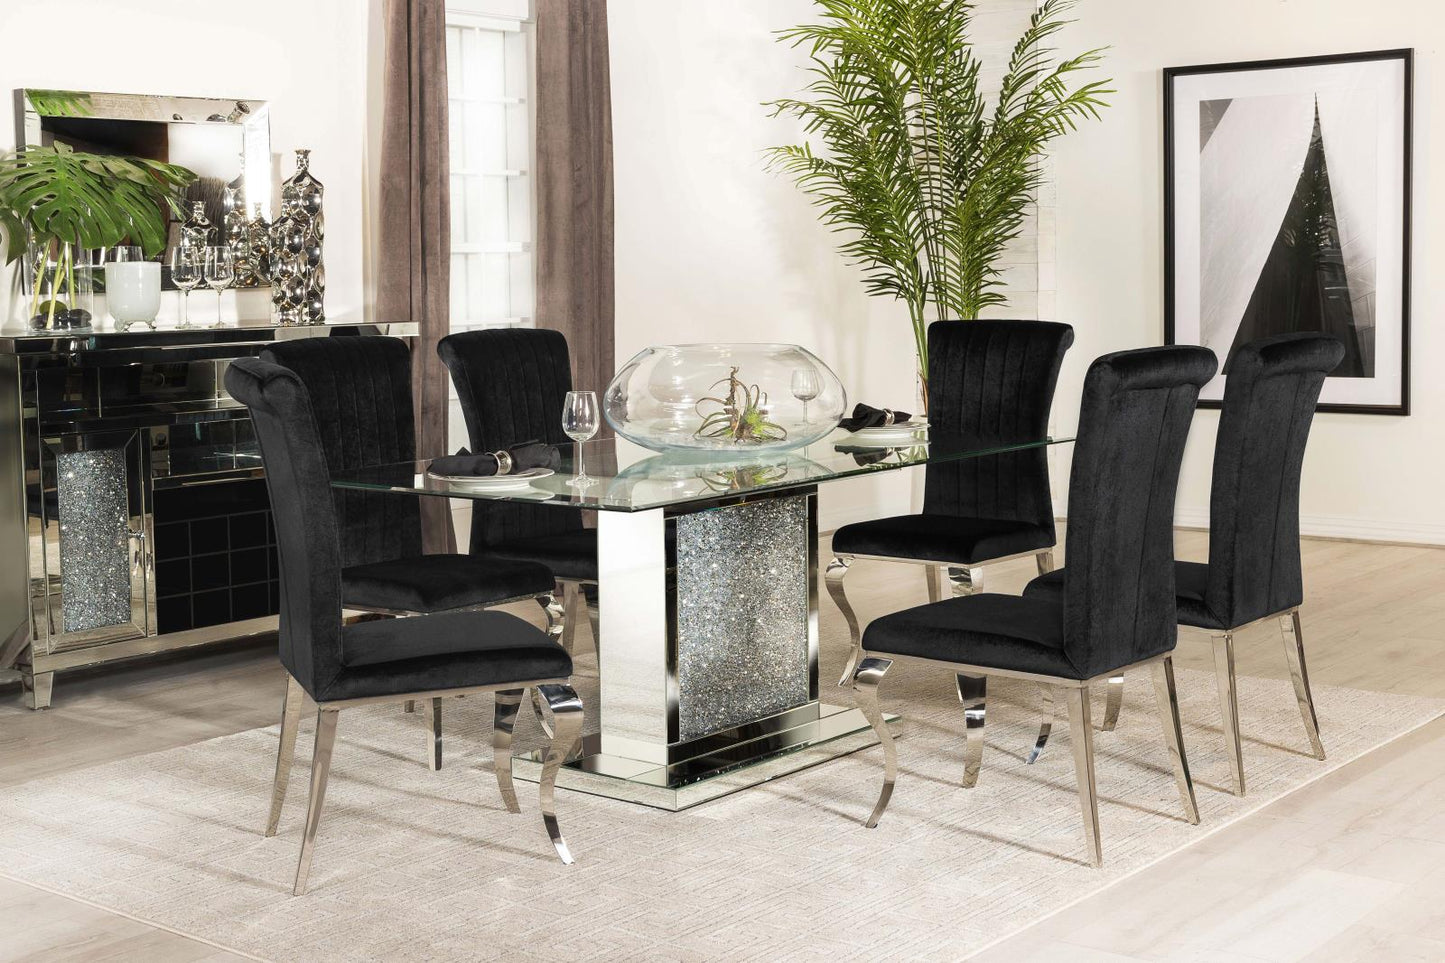 Marilyn 5-piece Rectangle Pedestal Dining Room Set Mirror and Black